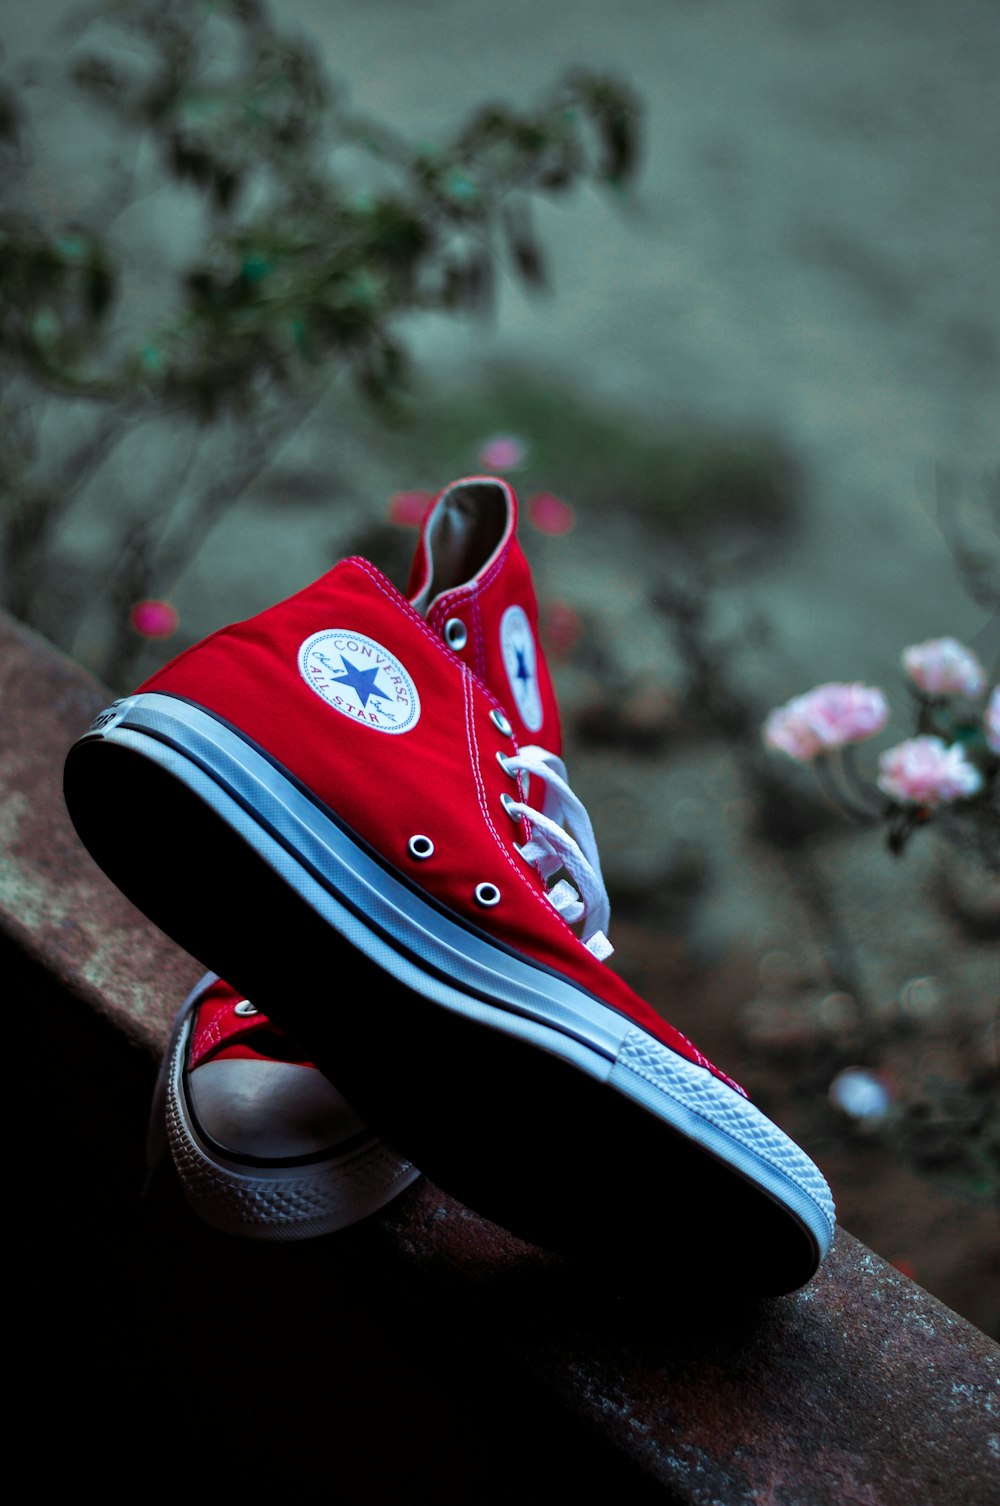 Red and black converse all star high top sneakers photo – Free Converse all  star Image on Unsplash